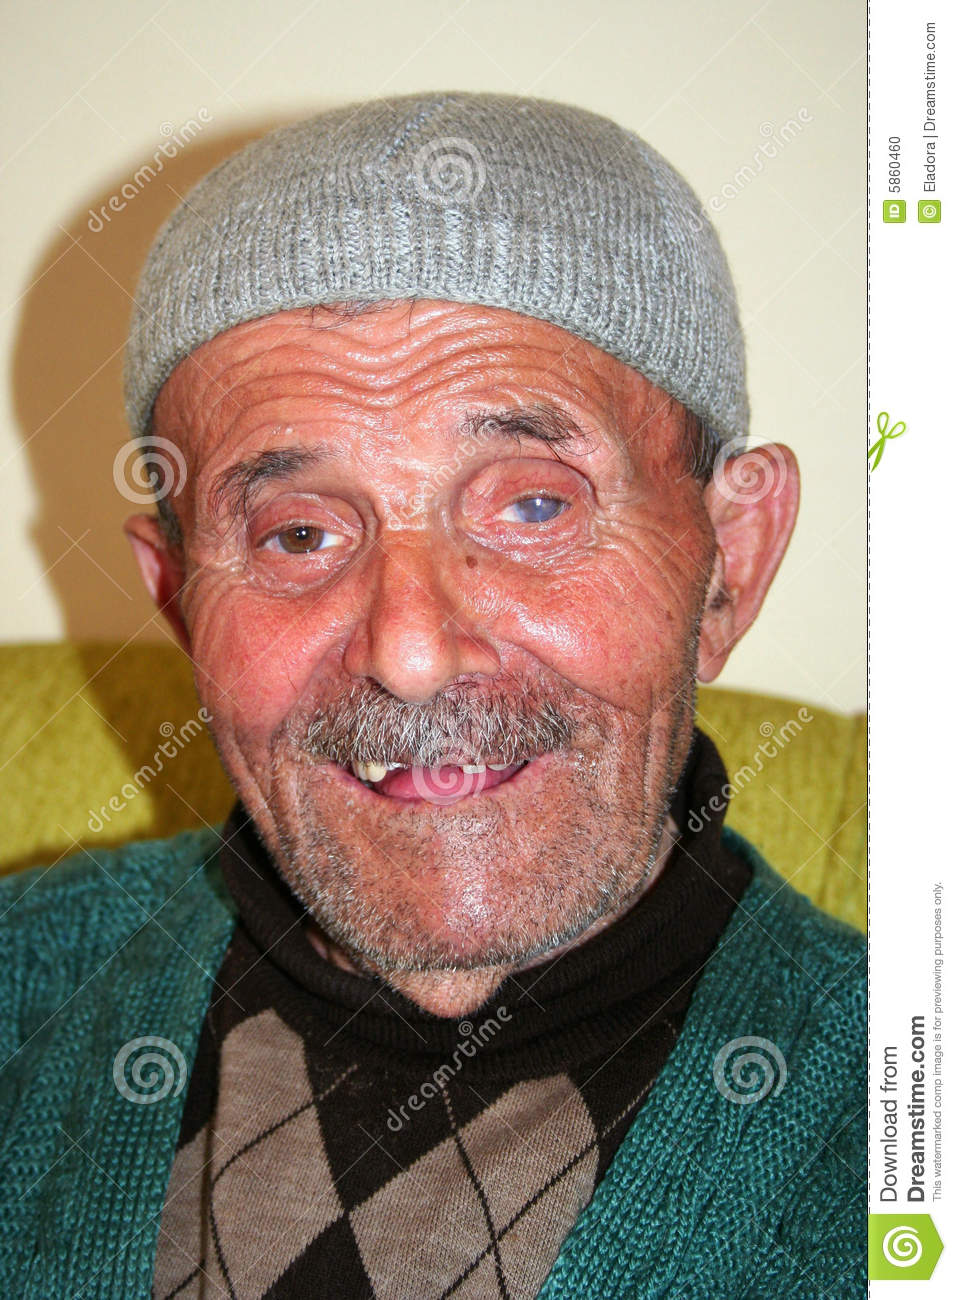 Old Man with No Teeth Smiling